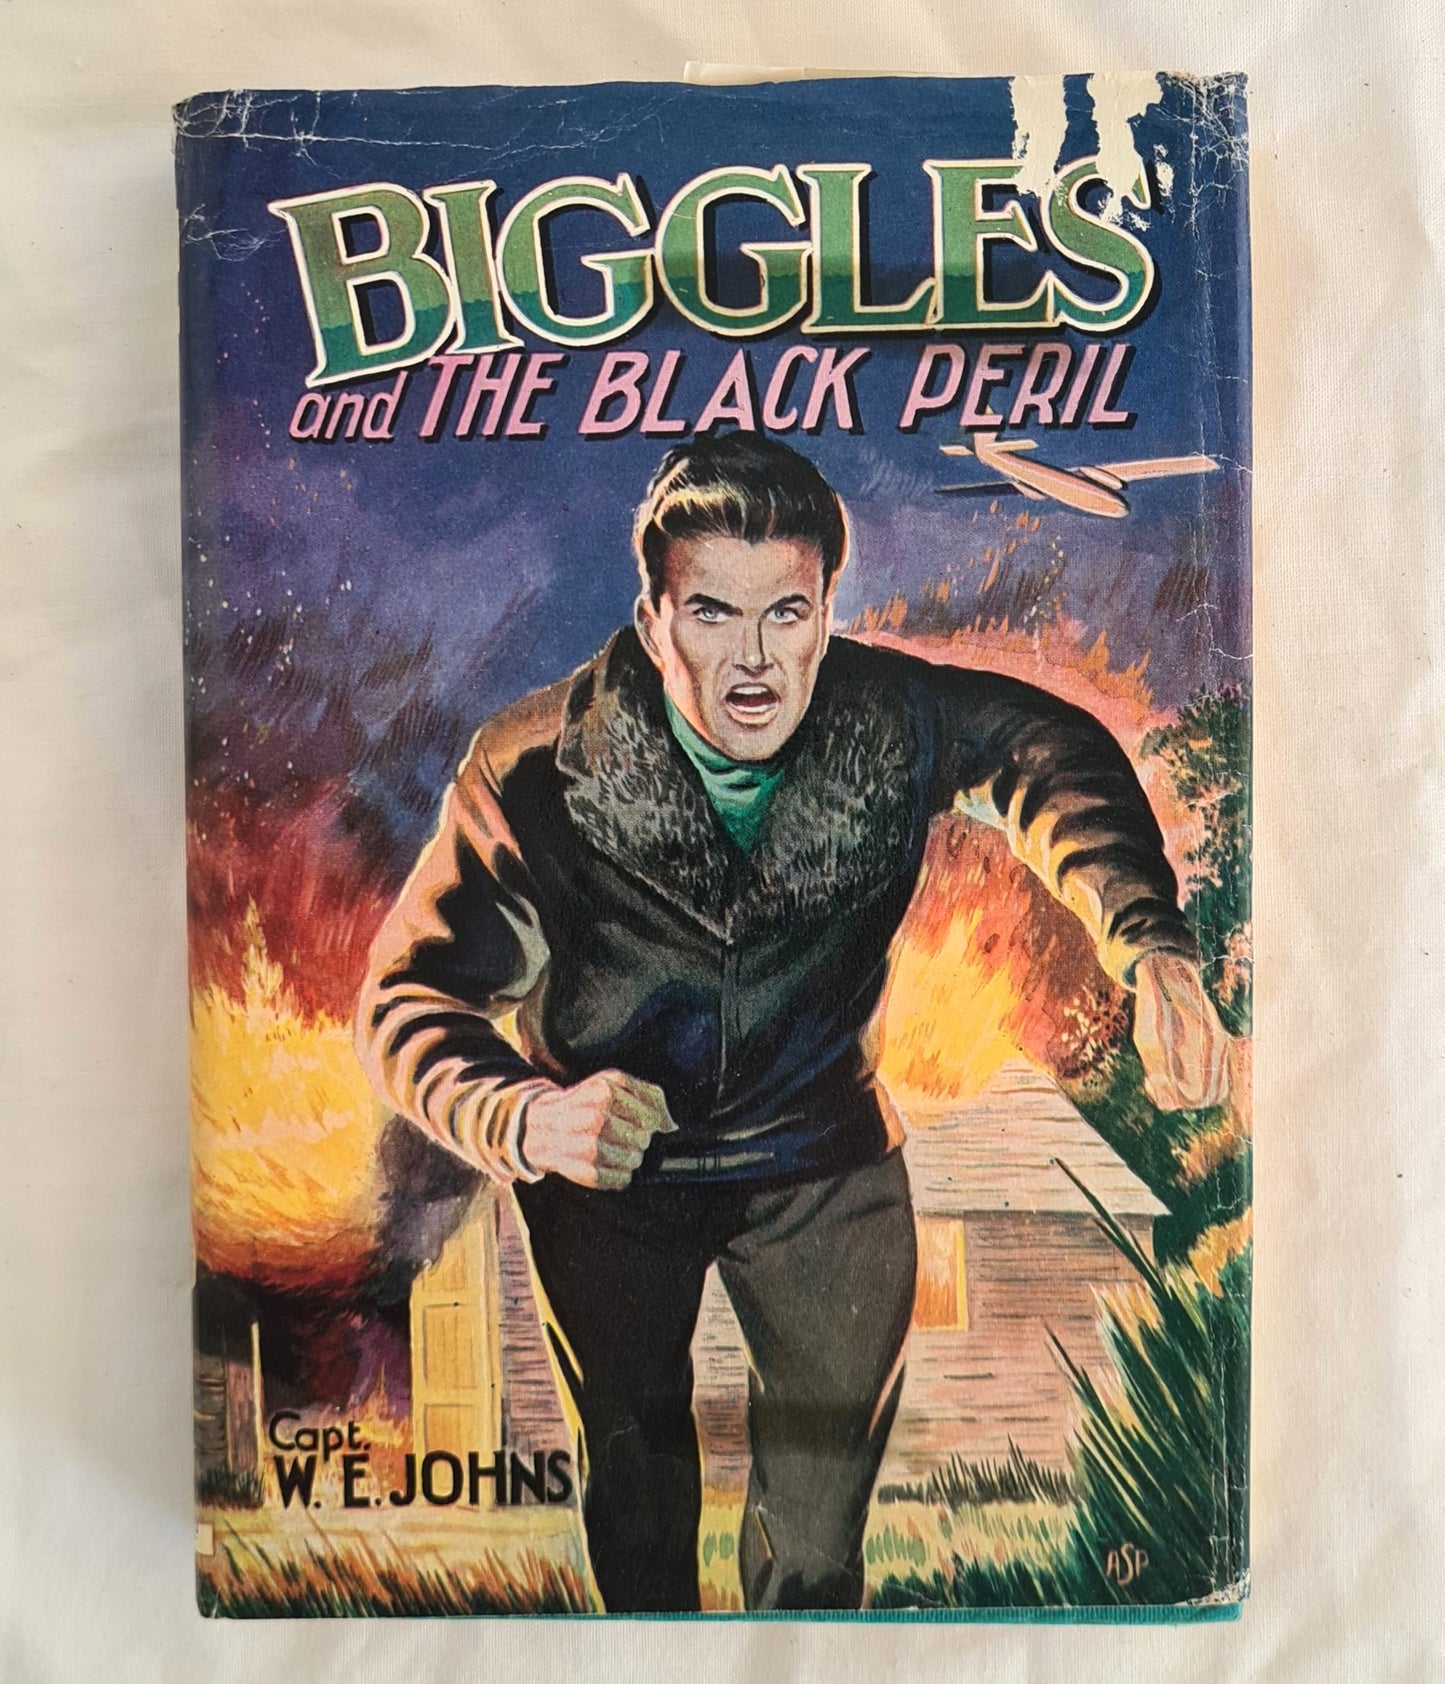 Biggles and the Black Peril by Captain W. E. Johns (dustjacket)